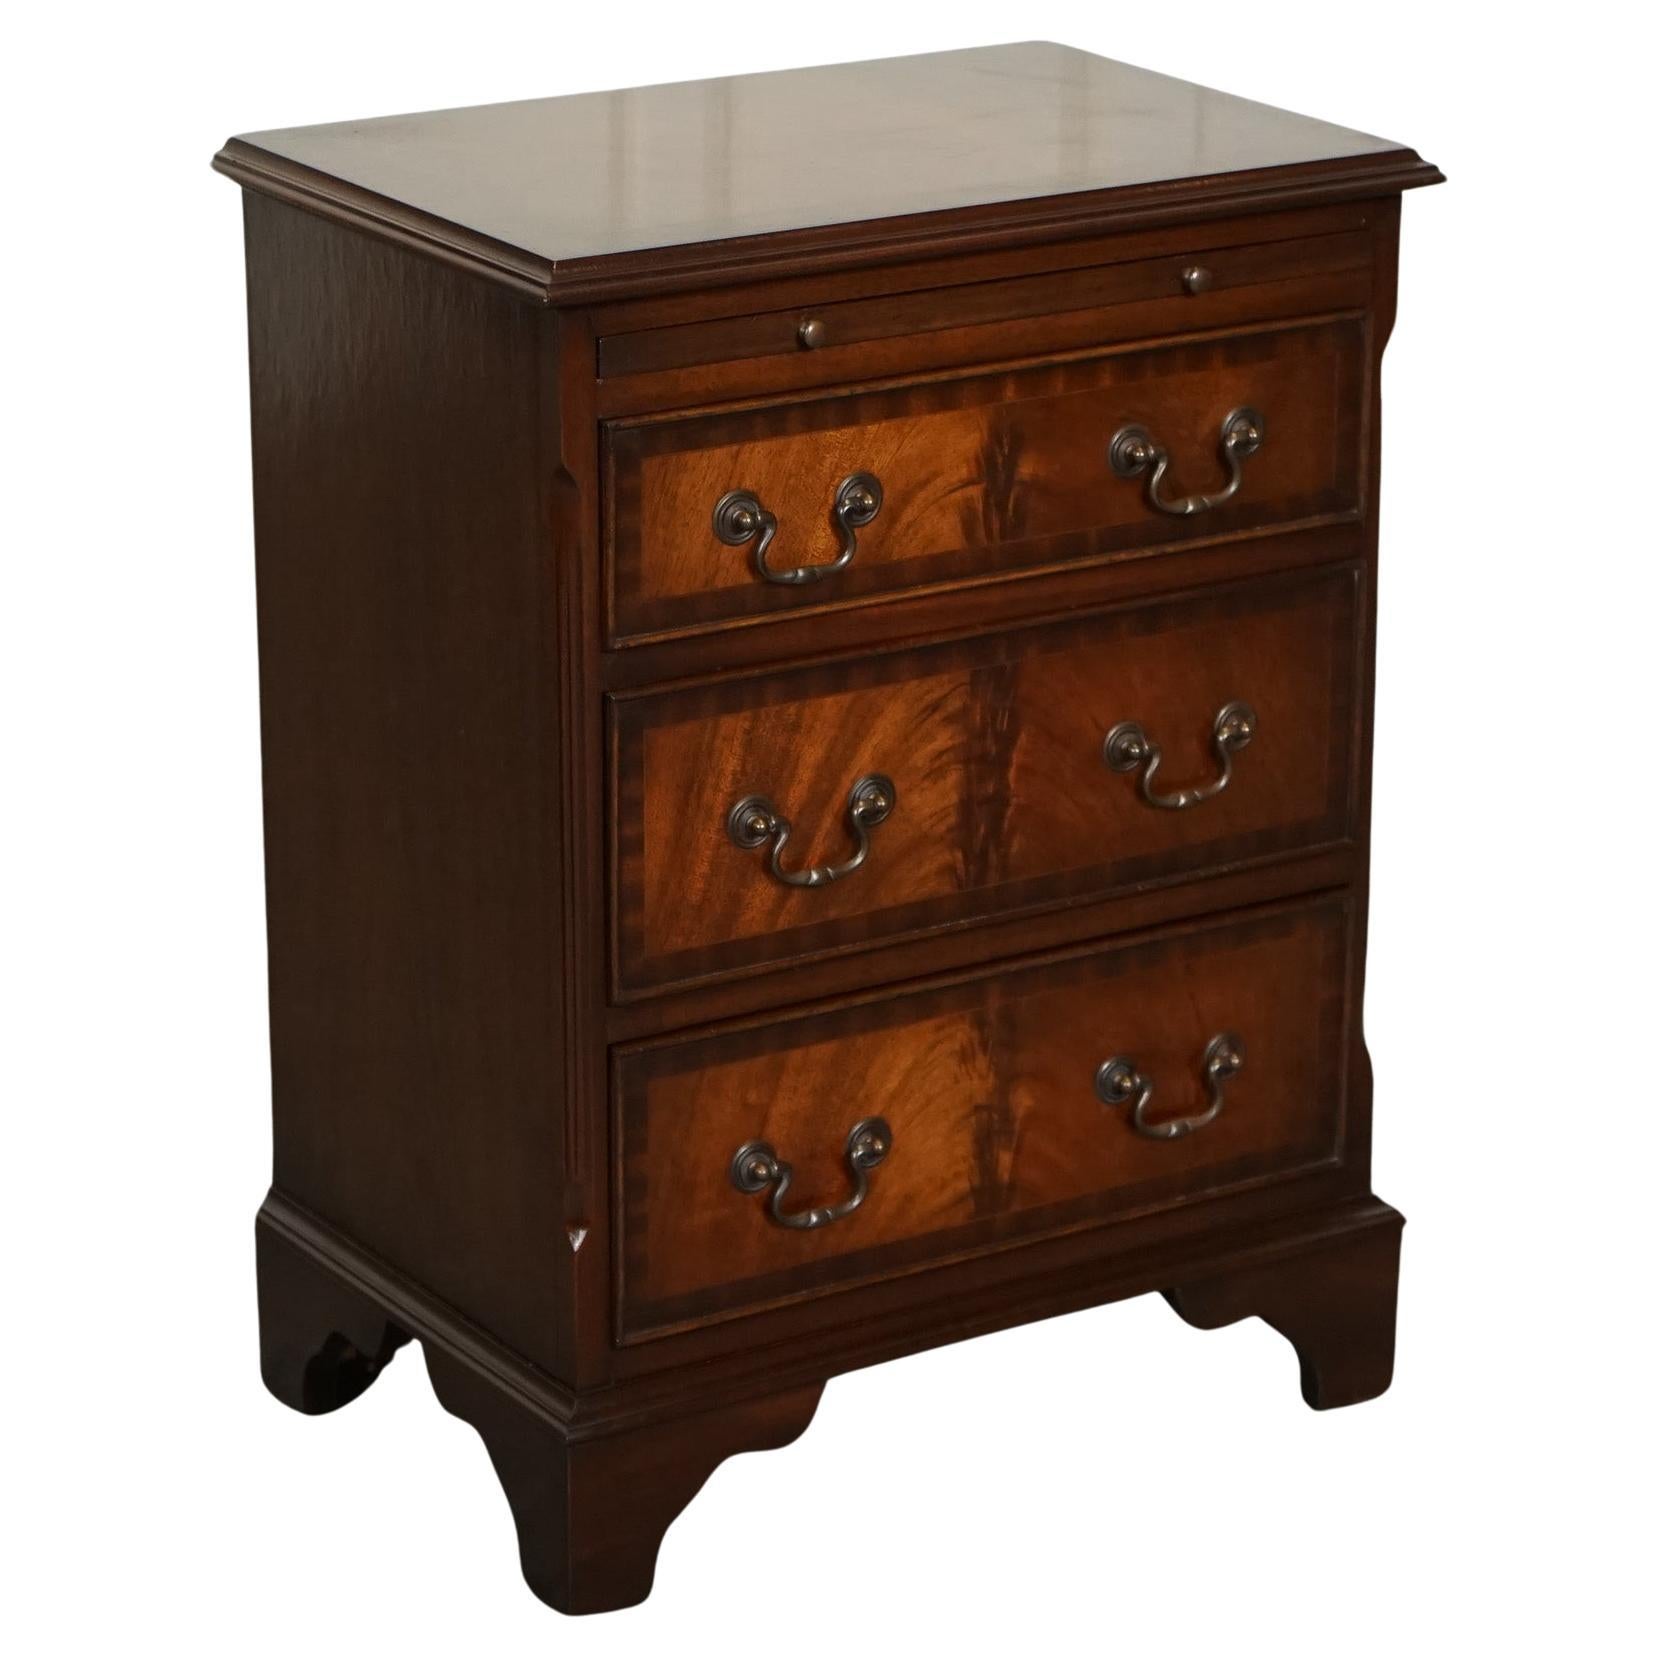 LOVELY GEORGIAN STYLE SMALL CHEST OF DRAWERS SiDE TABLE WITH BUTLER TRAY J1 For Sale